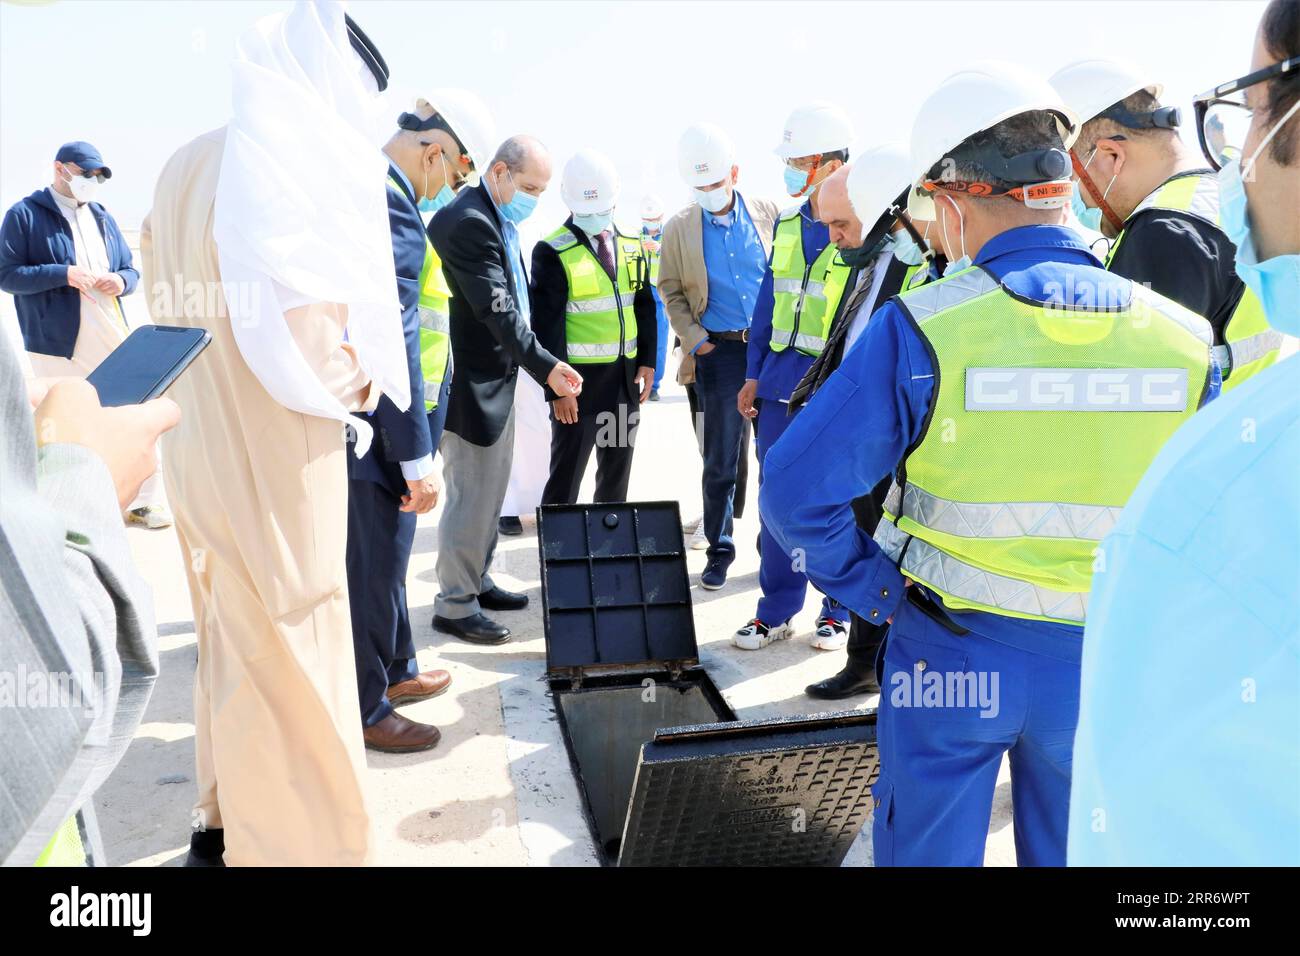 210302 -- JAHRA GOVERNORATE, March 2, 2021 -- Representatives of China Gezhouba Group Corporation CGGC and the Kuwaiti side inspect the construction site of a CGGC project in a desert of Jahra Governorate, Kuwait, March 2, 2021. China Gezhouba Group Corporation CGGC, affiliated to China Energy Engineering Group Co., Ltd., handed over on Tuesday the second batch of its housing infrastructure project to the Kuwaiti side, marking the handover of the main works of the project. Photo by Liu Lianghaoyue/Xinhua KUWAIT-JAHRA GOVERNORATE-CHINESE COMPANY-PROJECT-HANDOVER NiexYunpeng PUBLICATIONxNOTxINxC Stock Photo